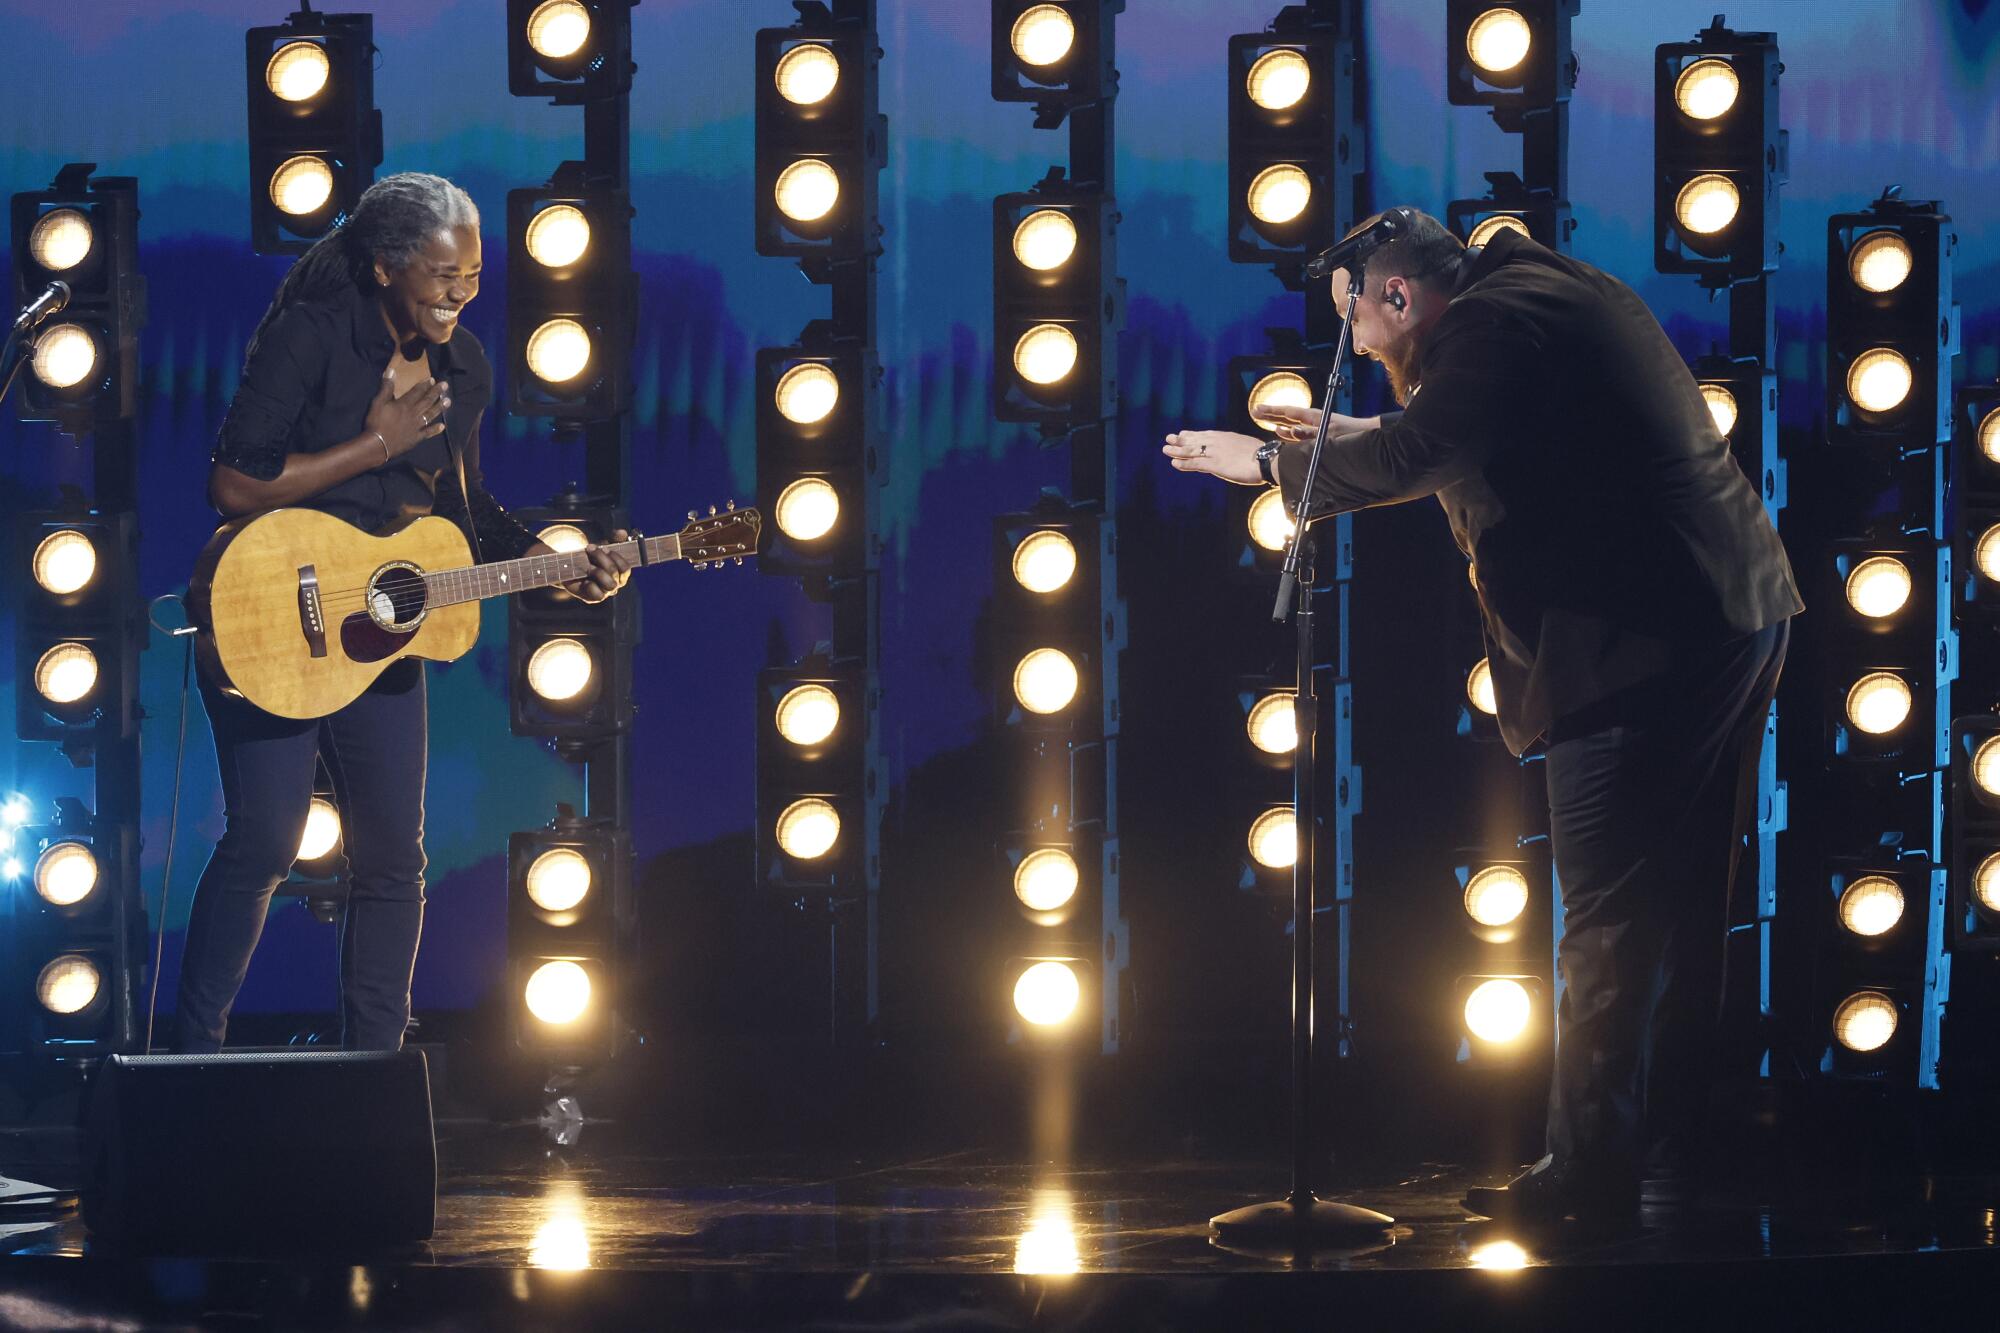 Tracy Chapman and Luke Combs perform "Fast Car" at the 66th Grammy Awards on Sunday.